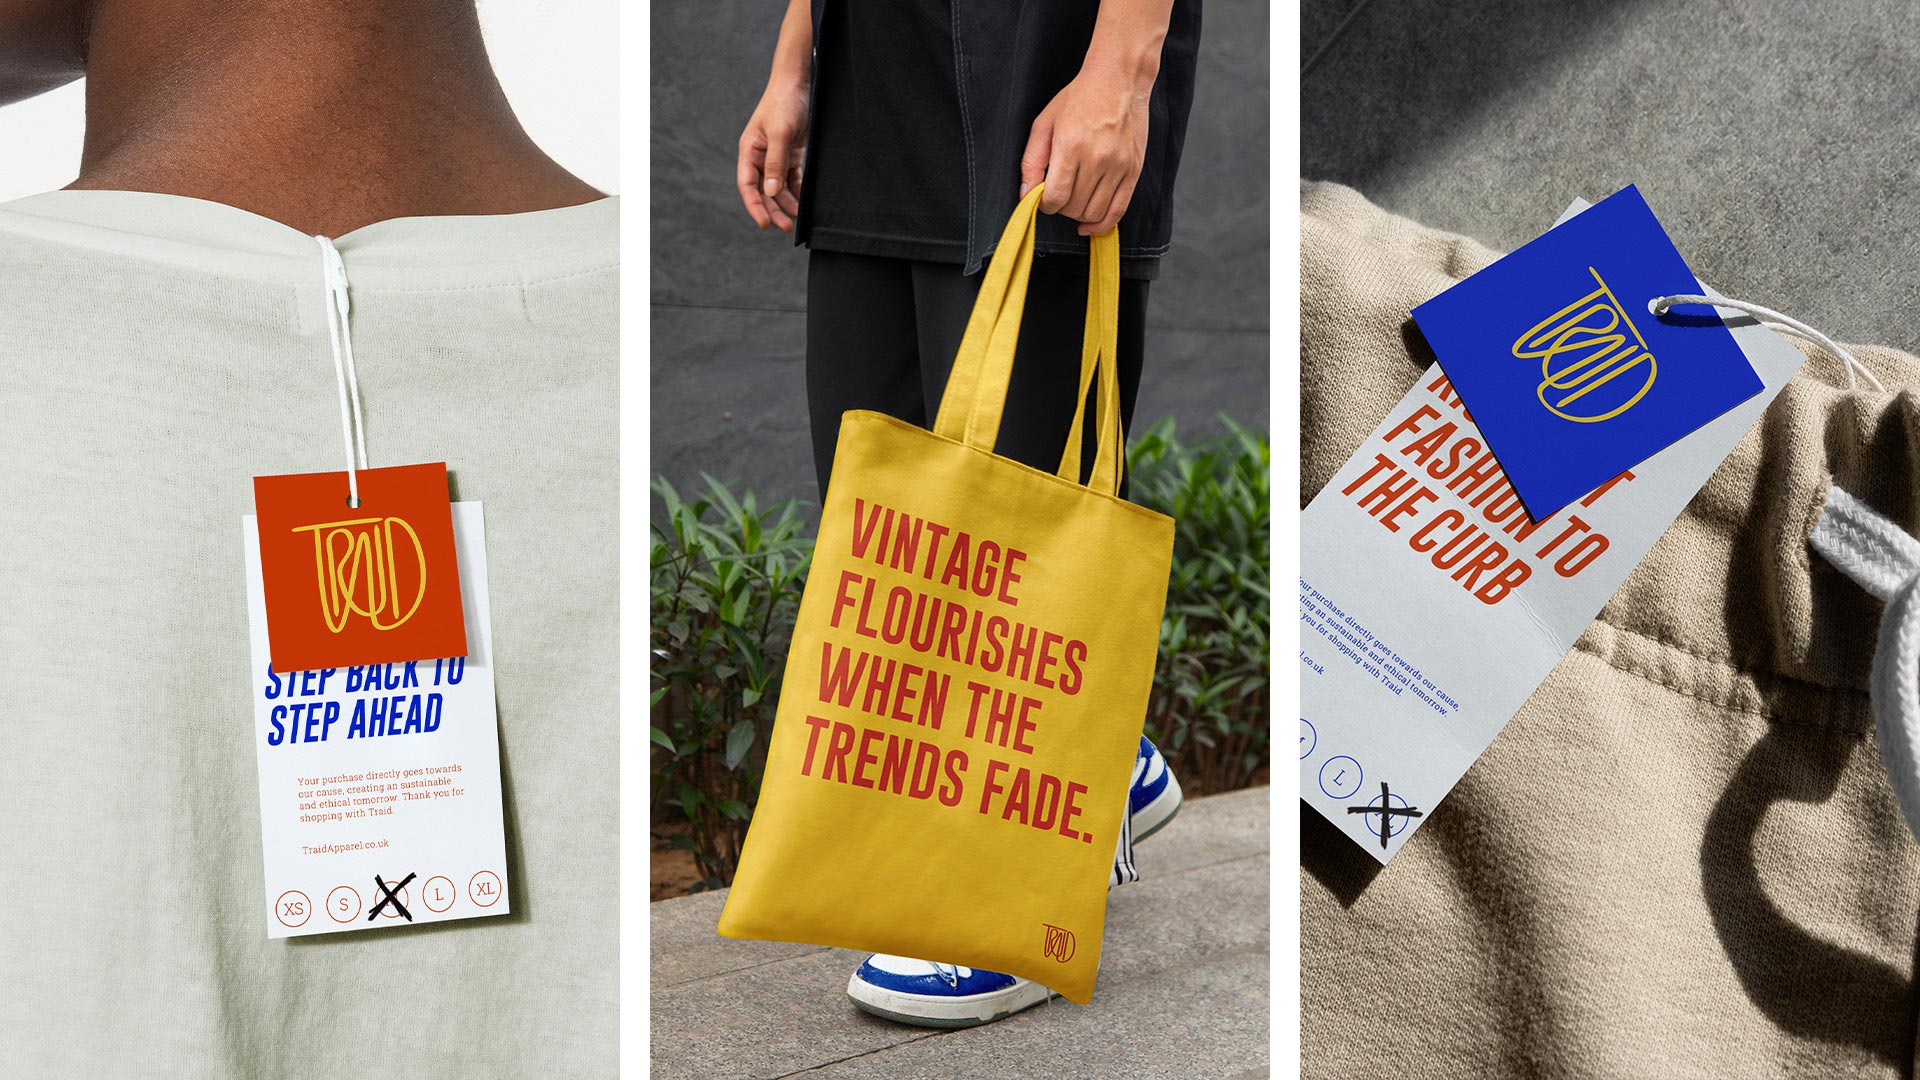 The brand identity used on the clothing hang tags and tote bags